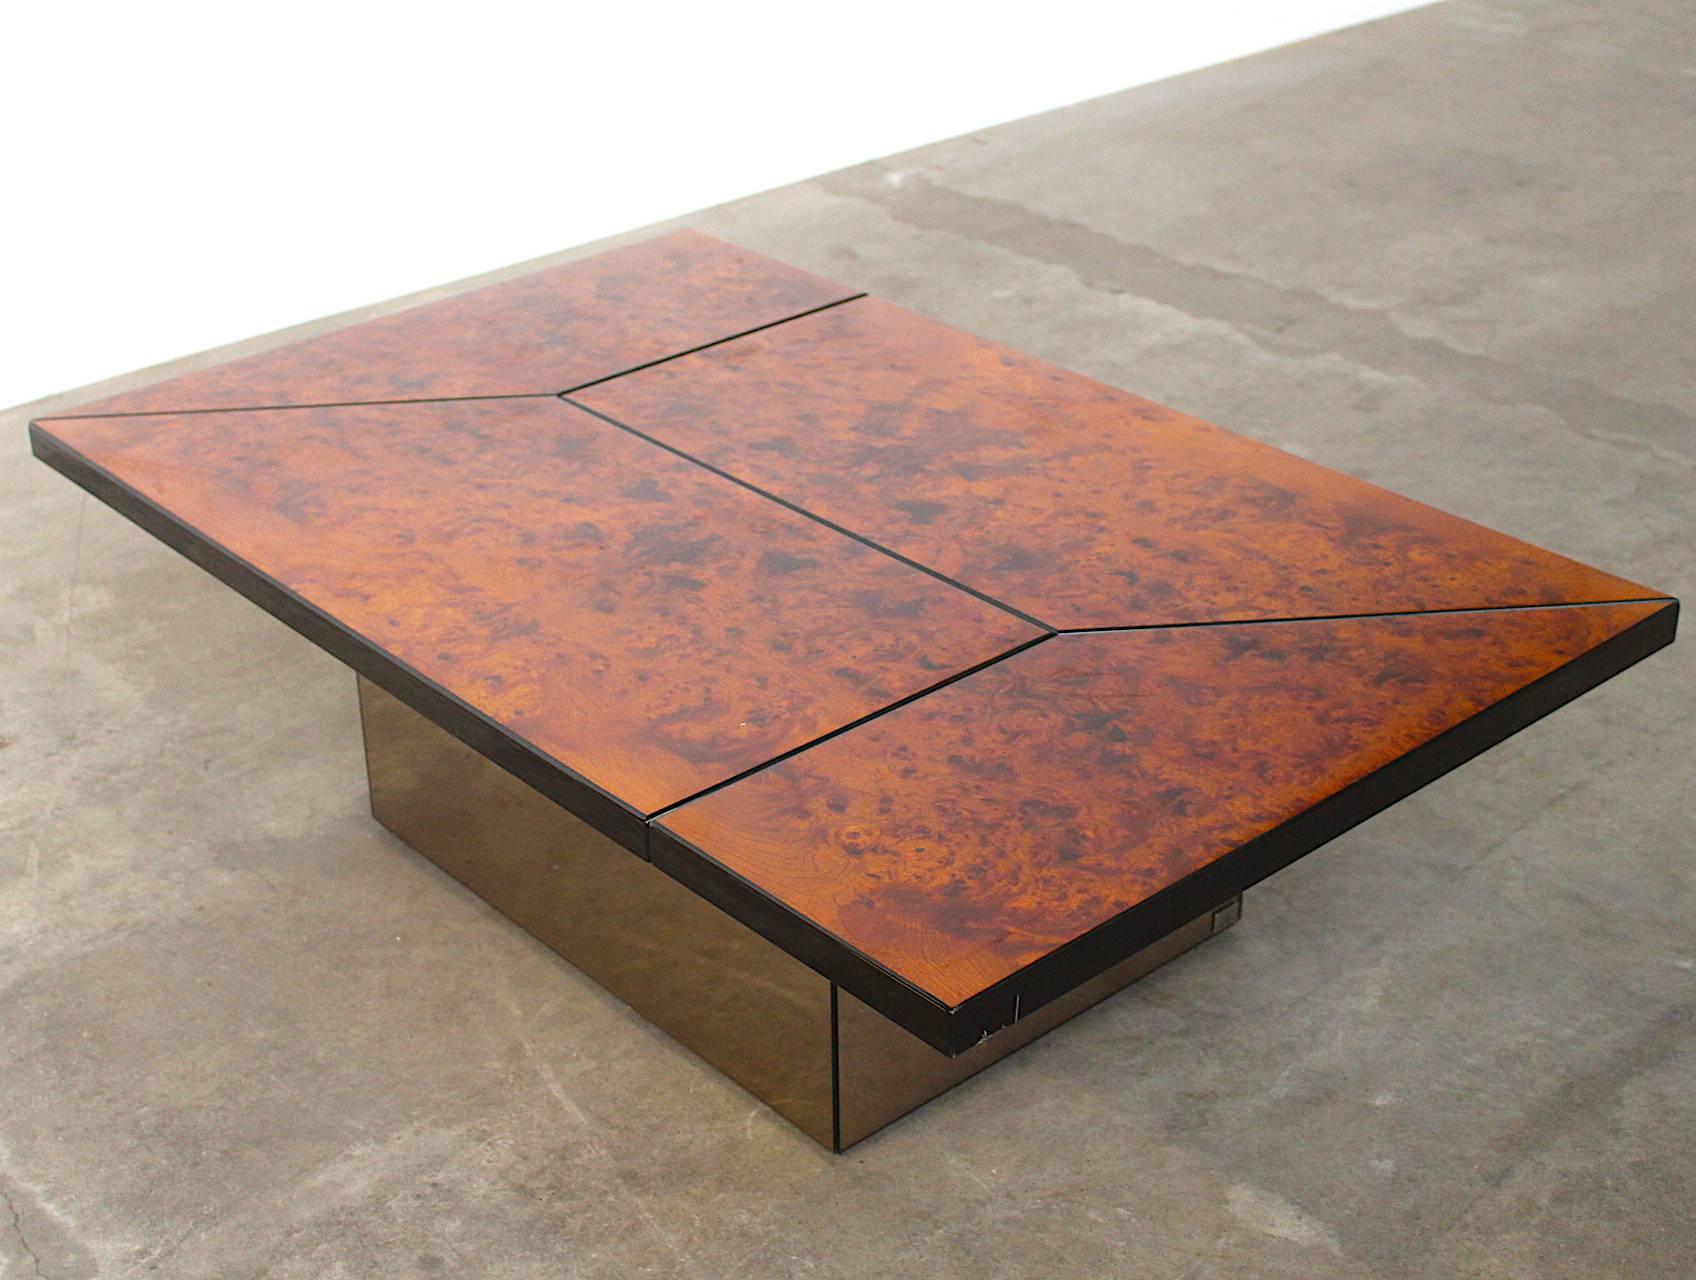 Paul Michel Burl Wood Multi-Functional Coffee Table and Dry Bar In Excellent Condition For Sale In Amsterdam, NL